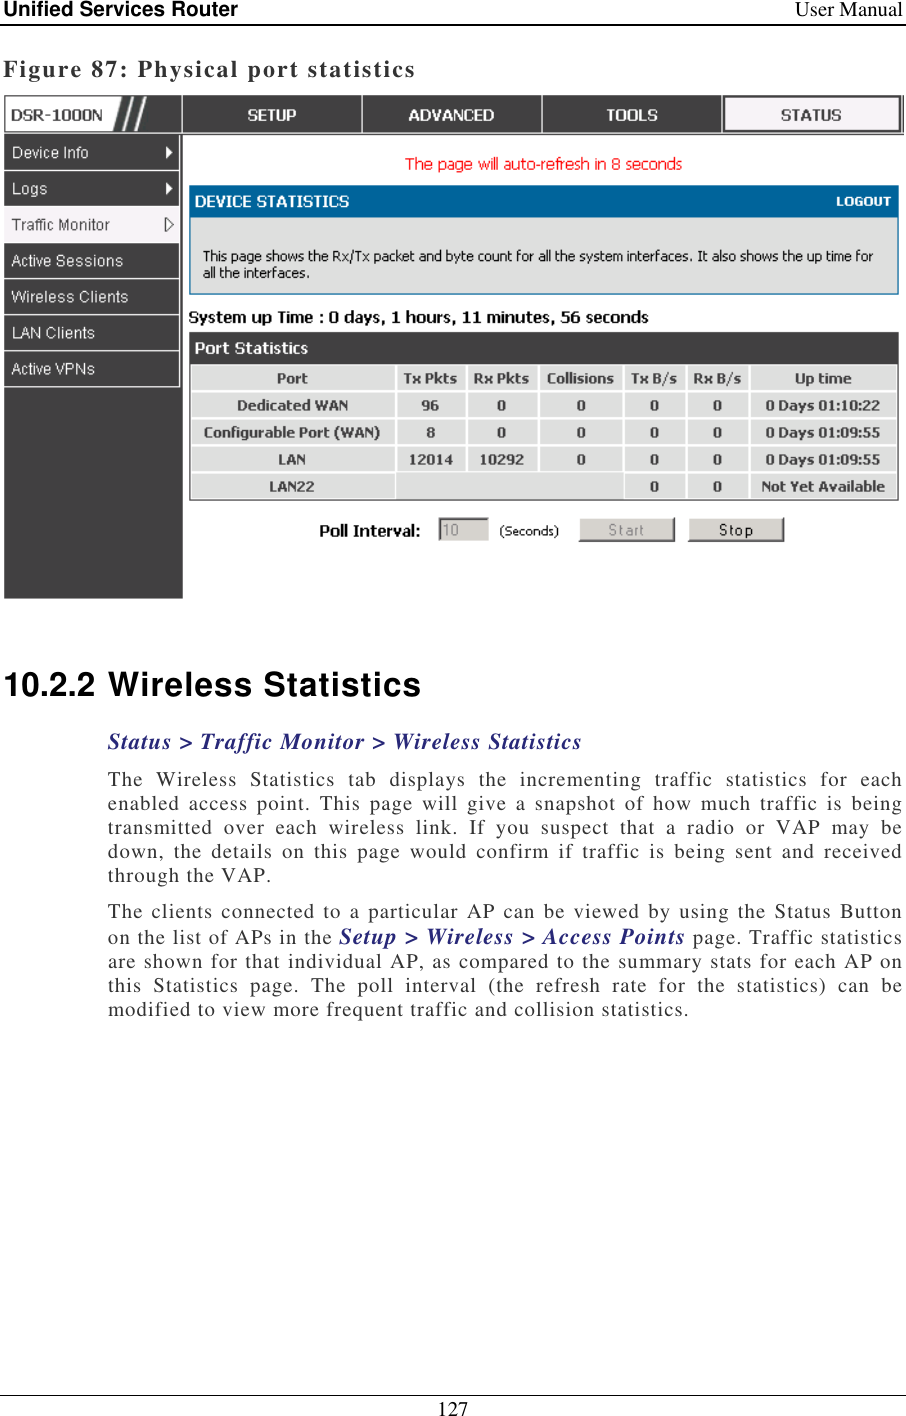 Unified Services Router    User Manual 127  Figure 87: Physical port statistics   10.2.2 Wireless Statistics Status &gt; Traffic Monitor &gt; Wireless Statistics The  Wireless  Statistics  tab  displays  the  incrementing  traffic  statistics  for  each enabled  access  point.  This  page  will  give  a  snapshot  of  how  much  traffic  is  being transmitted  over  each  wireless  link.  If  you  suspect  that  a  radio  or  VAP  may  be down,  the  details  on  this  page  would  confirm  if  traffic  is  being  sent  and  received through the VAP.  The  clients connected to a  particular  AP  can be  viewed  by  using the  Status  Button on the list of APs in the Setup &gt; Wireless &gt; Access Points page. Traffic statistics are shown for that individual AP, as compared to the summary stats for each AP on this  Statistics  page.  The  poll  interval  (the  refresh  rate  for  the  statistics)  can  be modified to view more frequent traffic and collision statistics. 